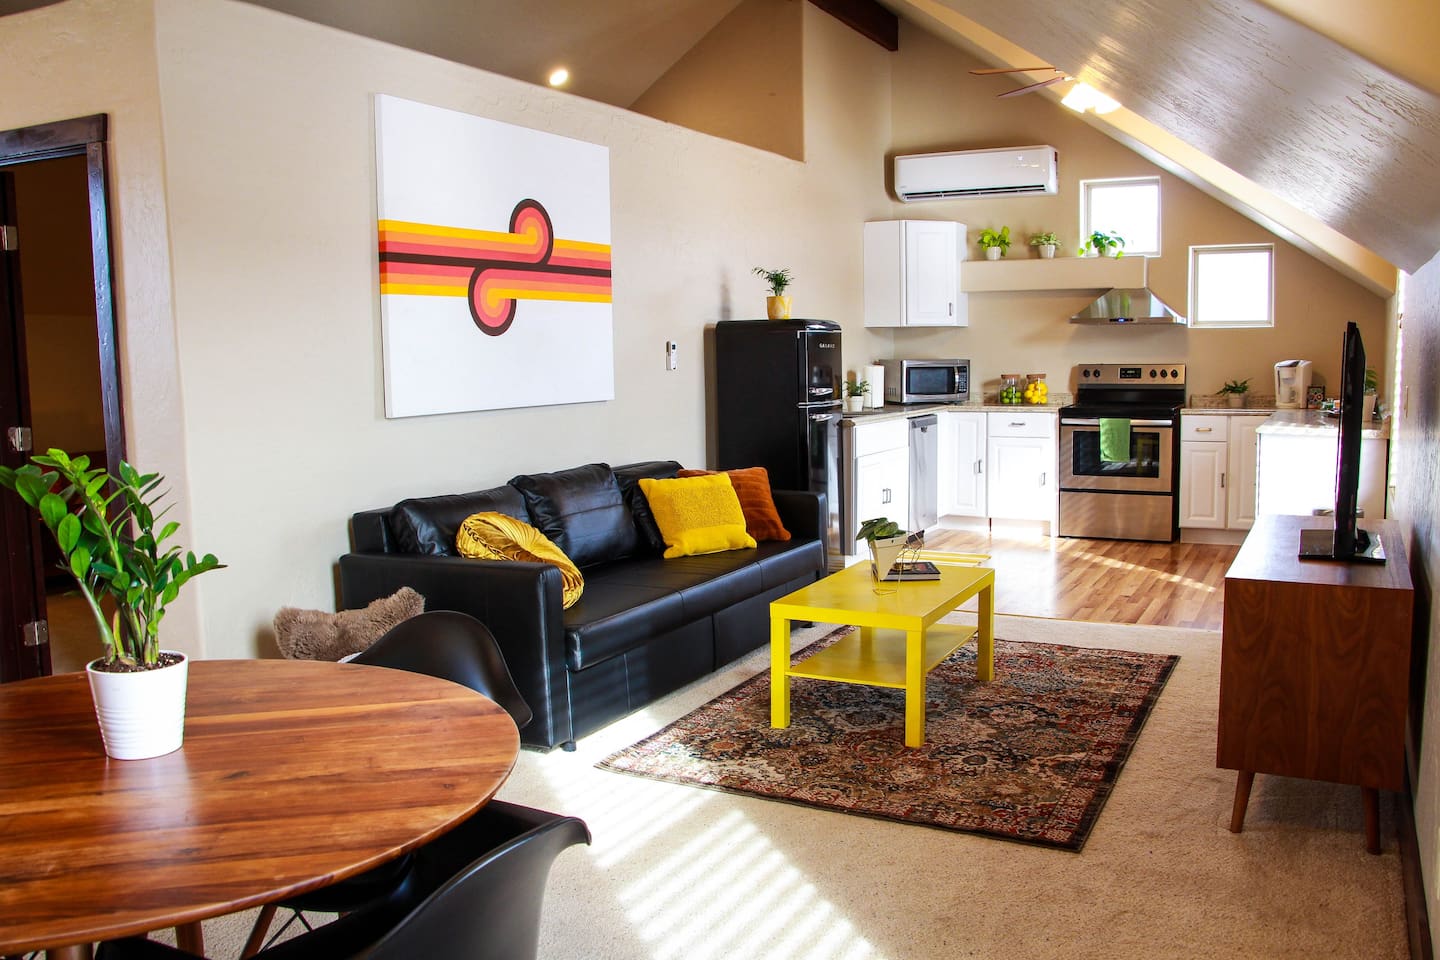 The Retro Apartment is one of the 15 best Airbnbs in Flagstaff